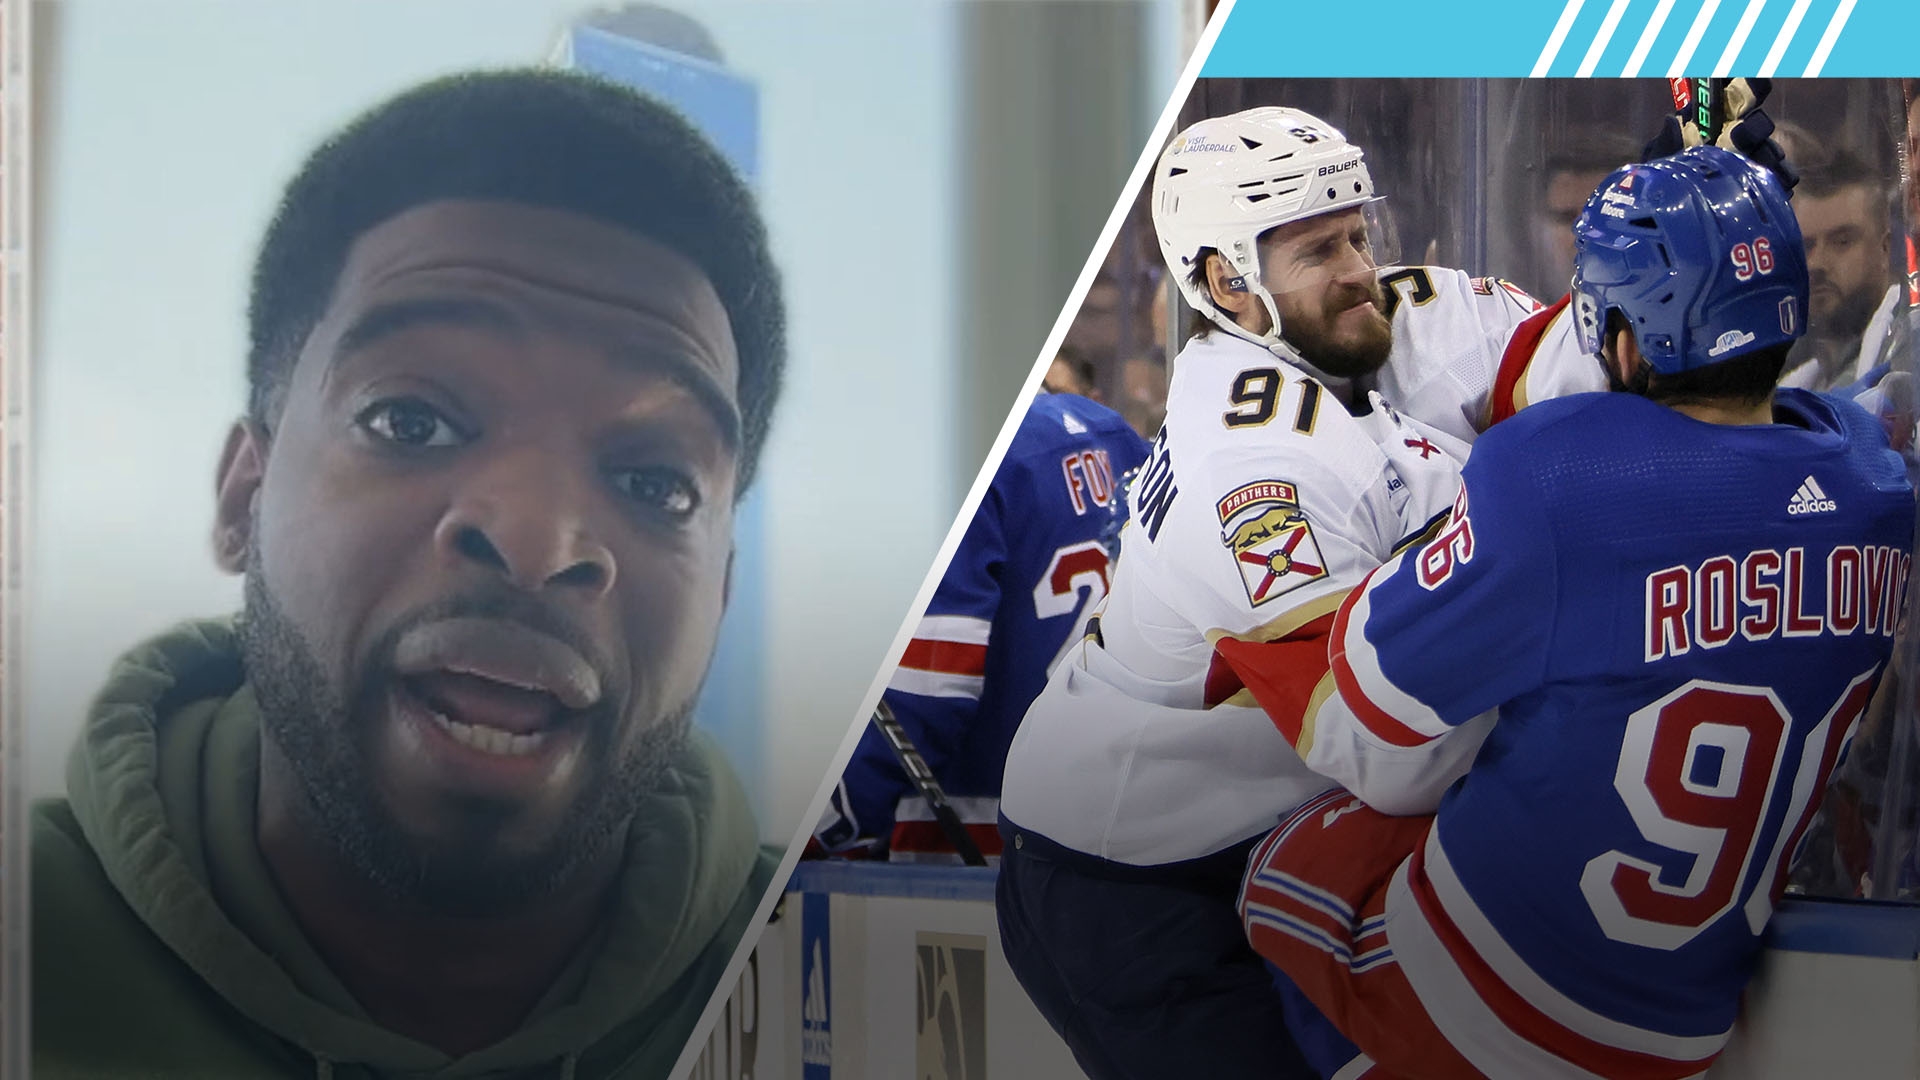 Subban: Emotion wasn't there for Rangers in Game 1